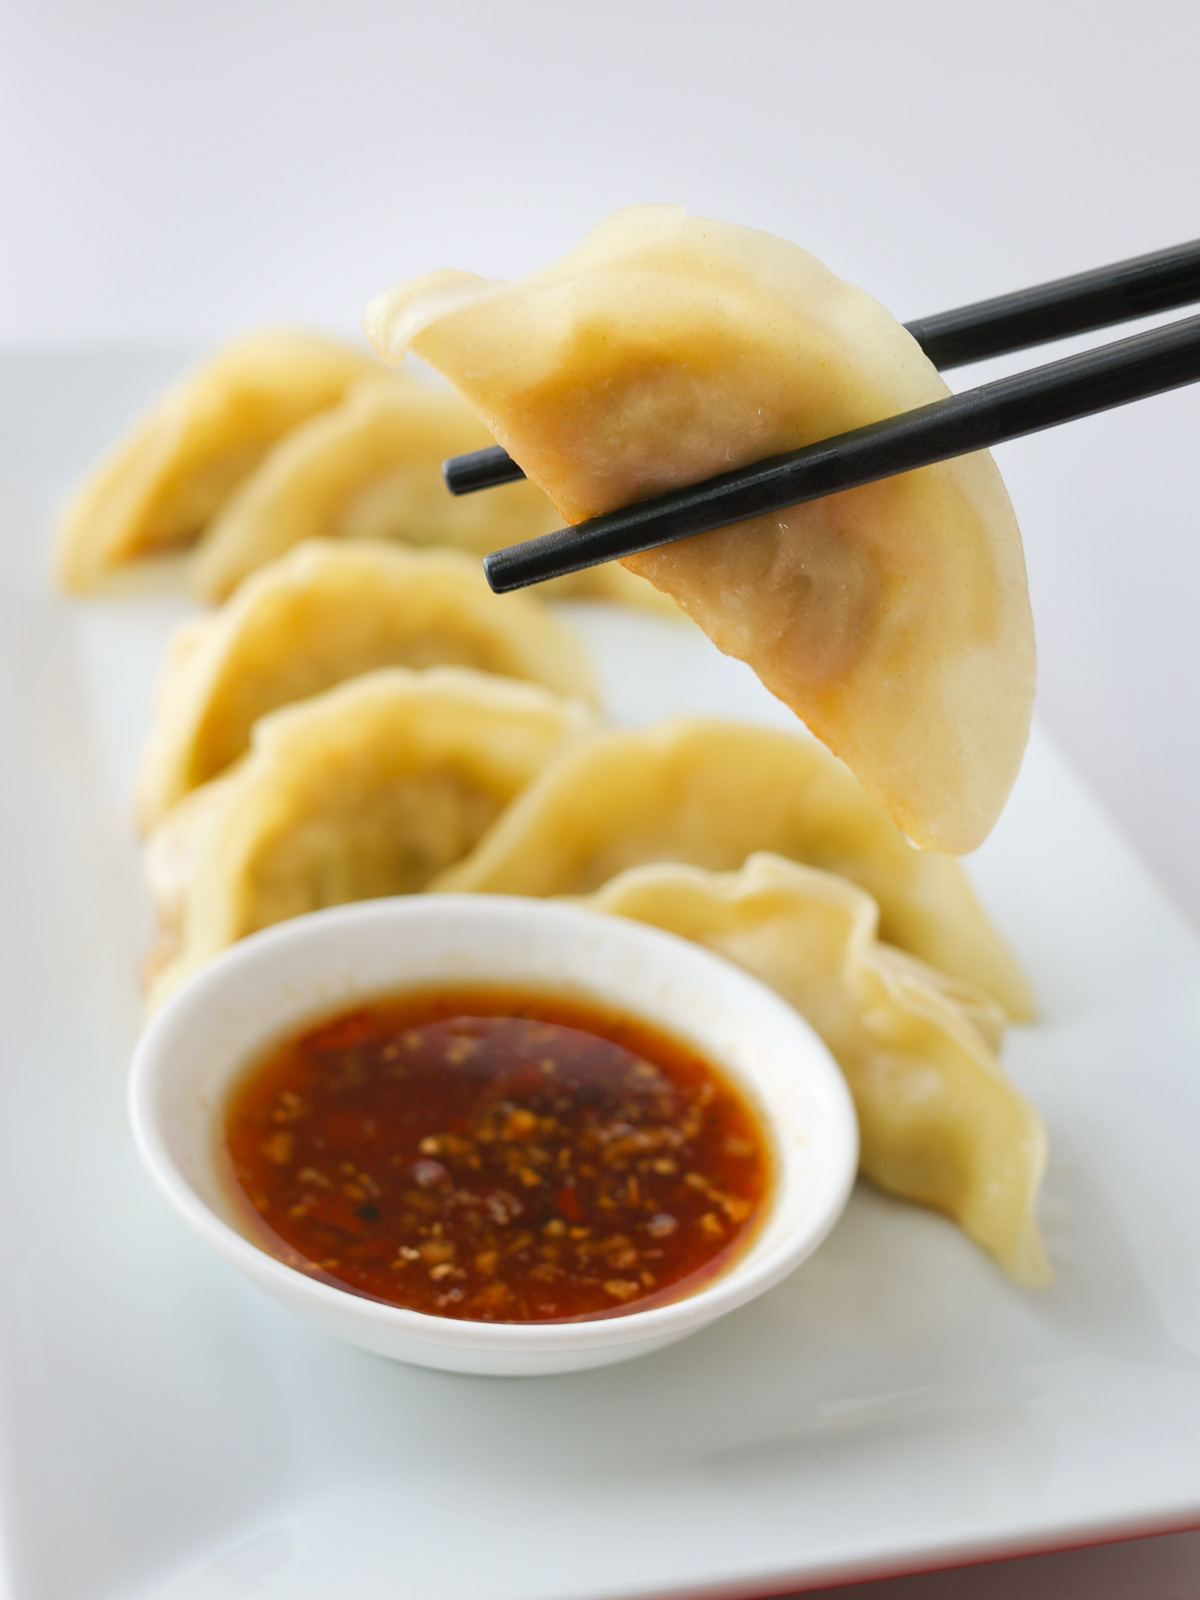 holding a potsticker in chopsticks above a platter of potstickers with dipping cup of sauce, 